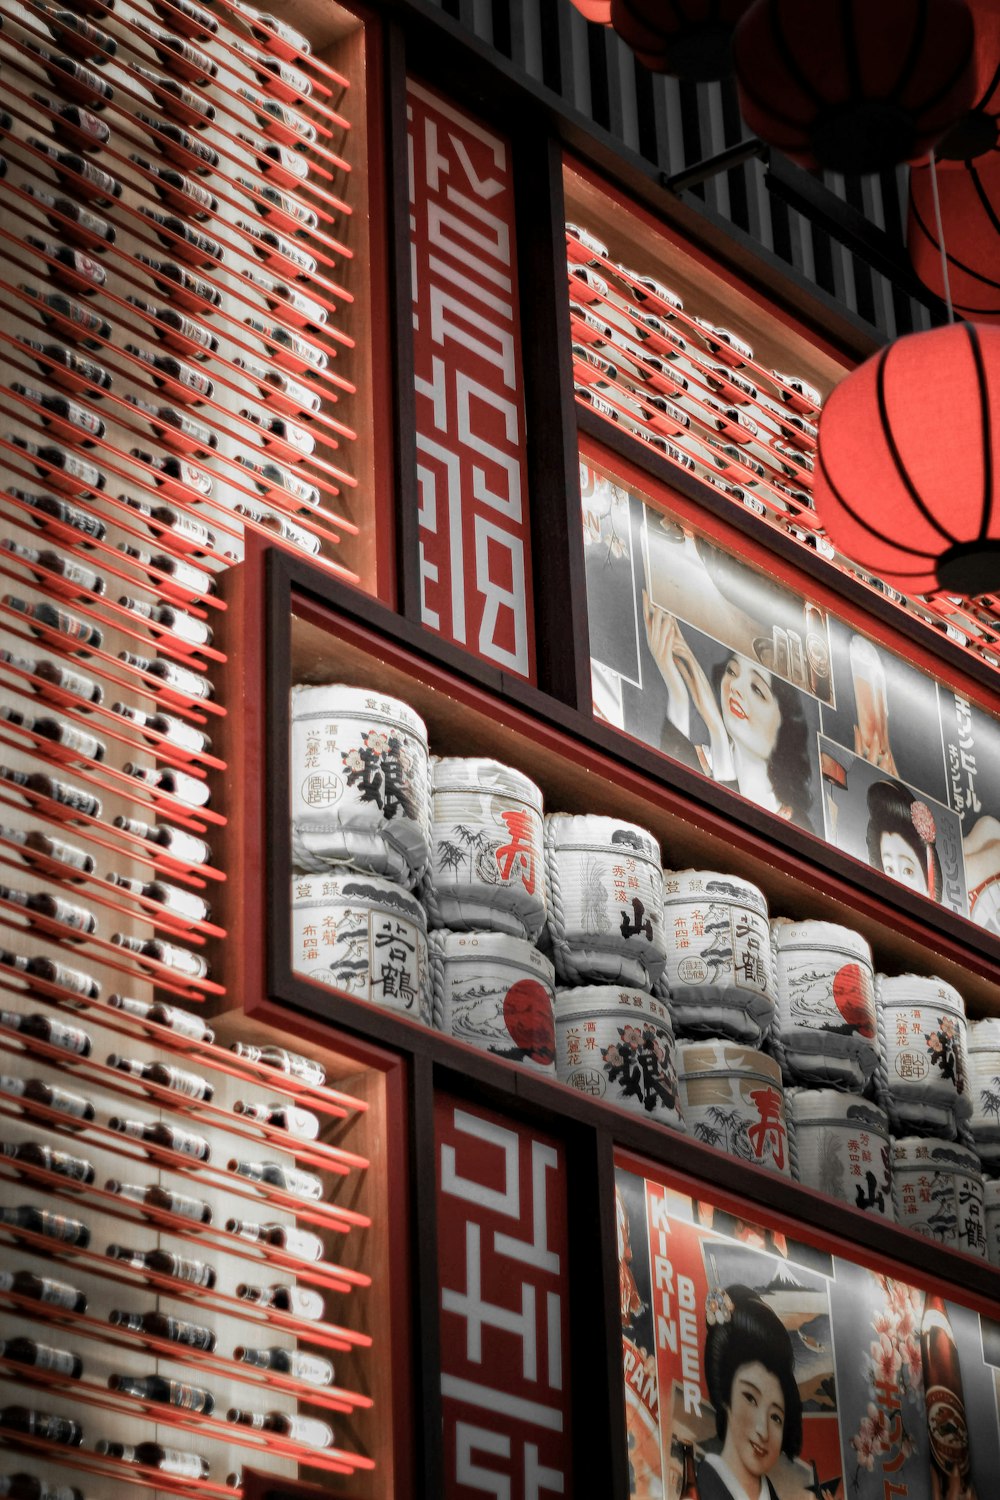 a display of cans of sake in a store